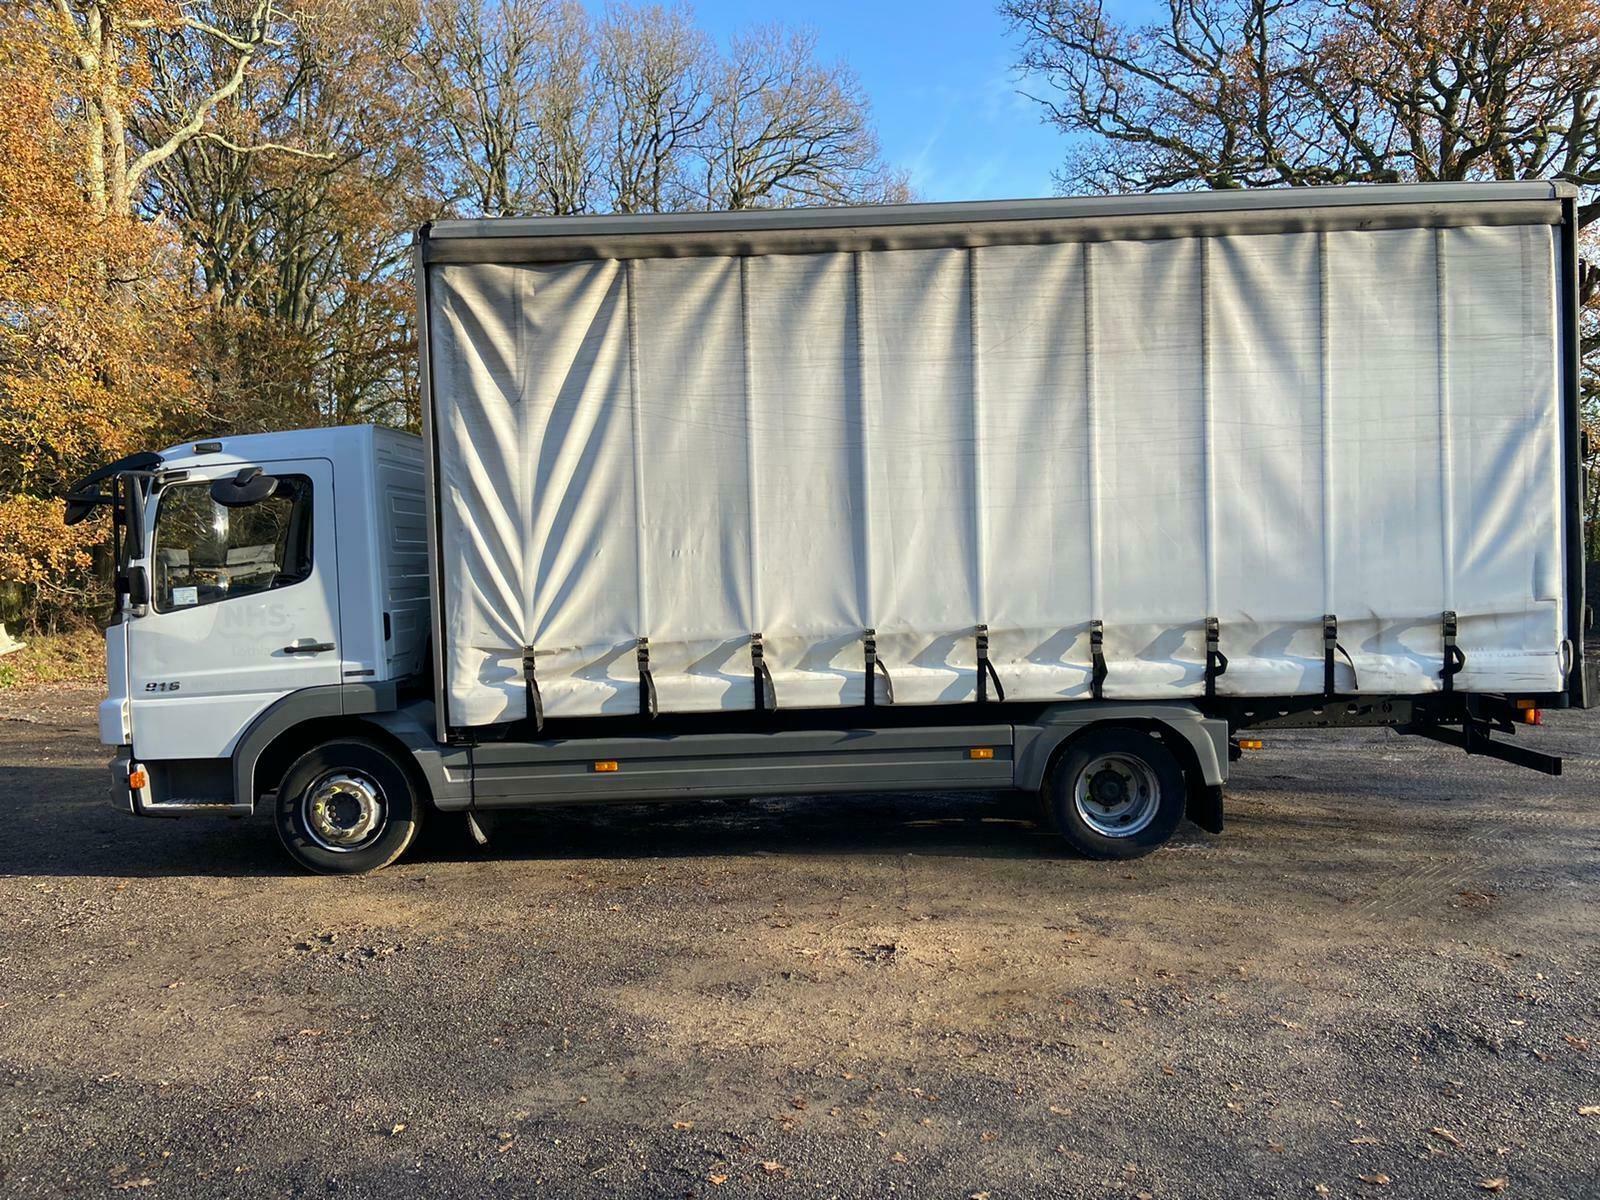 Mercedes-Benz Atego 816 2007 57 7.5 ton 20ft Curtain side ...